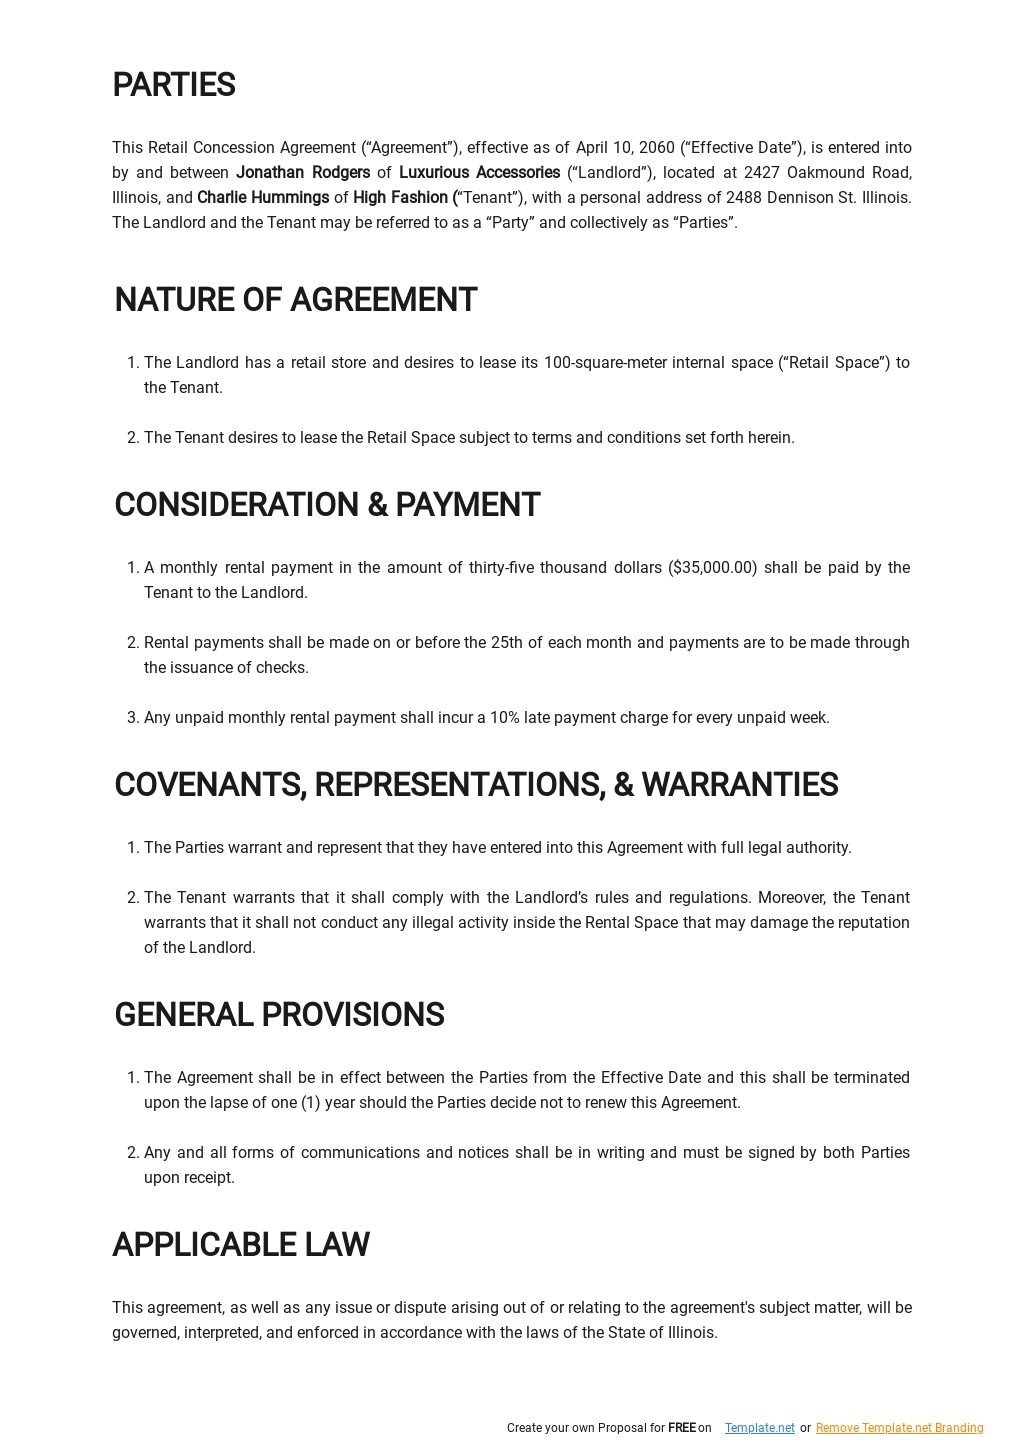 Free Retail Concession Agreement Template  1.jpe